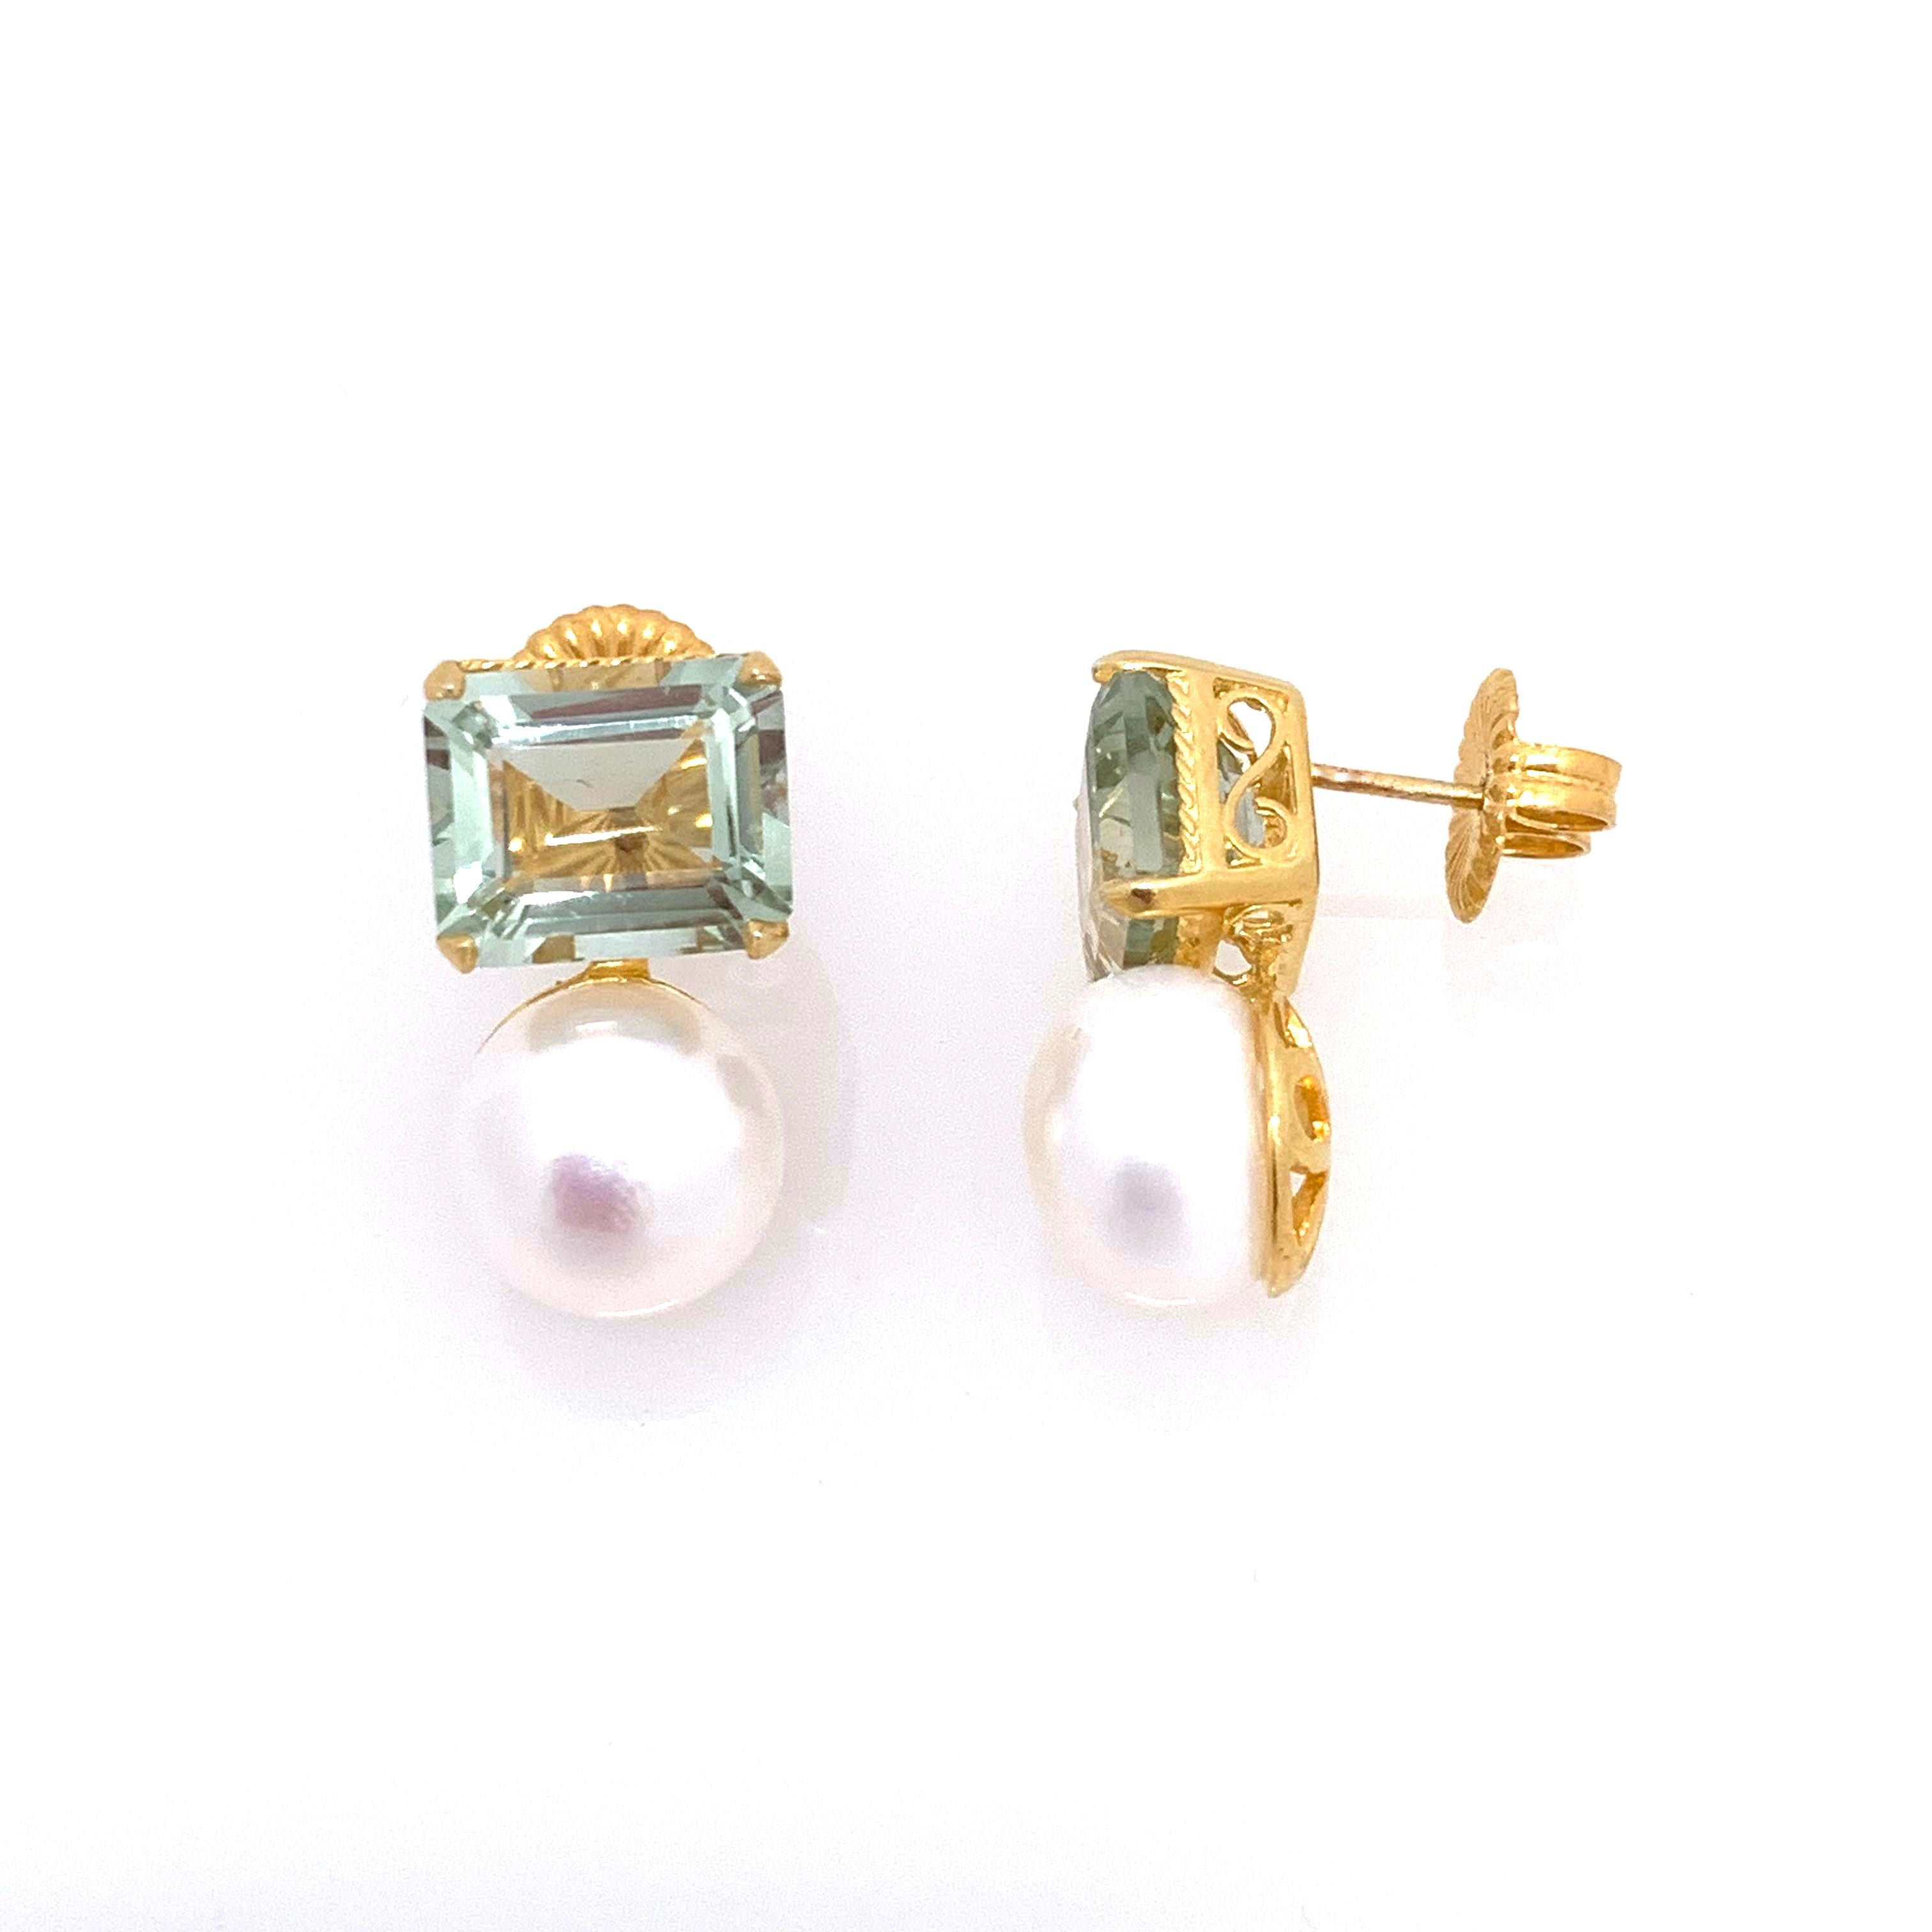 Contemporary Emerald-cut Prasiolite and Freshwater Pearl Earrings